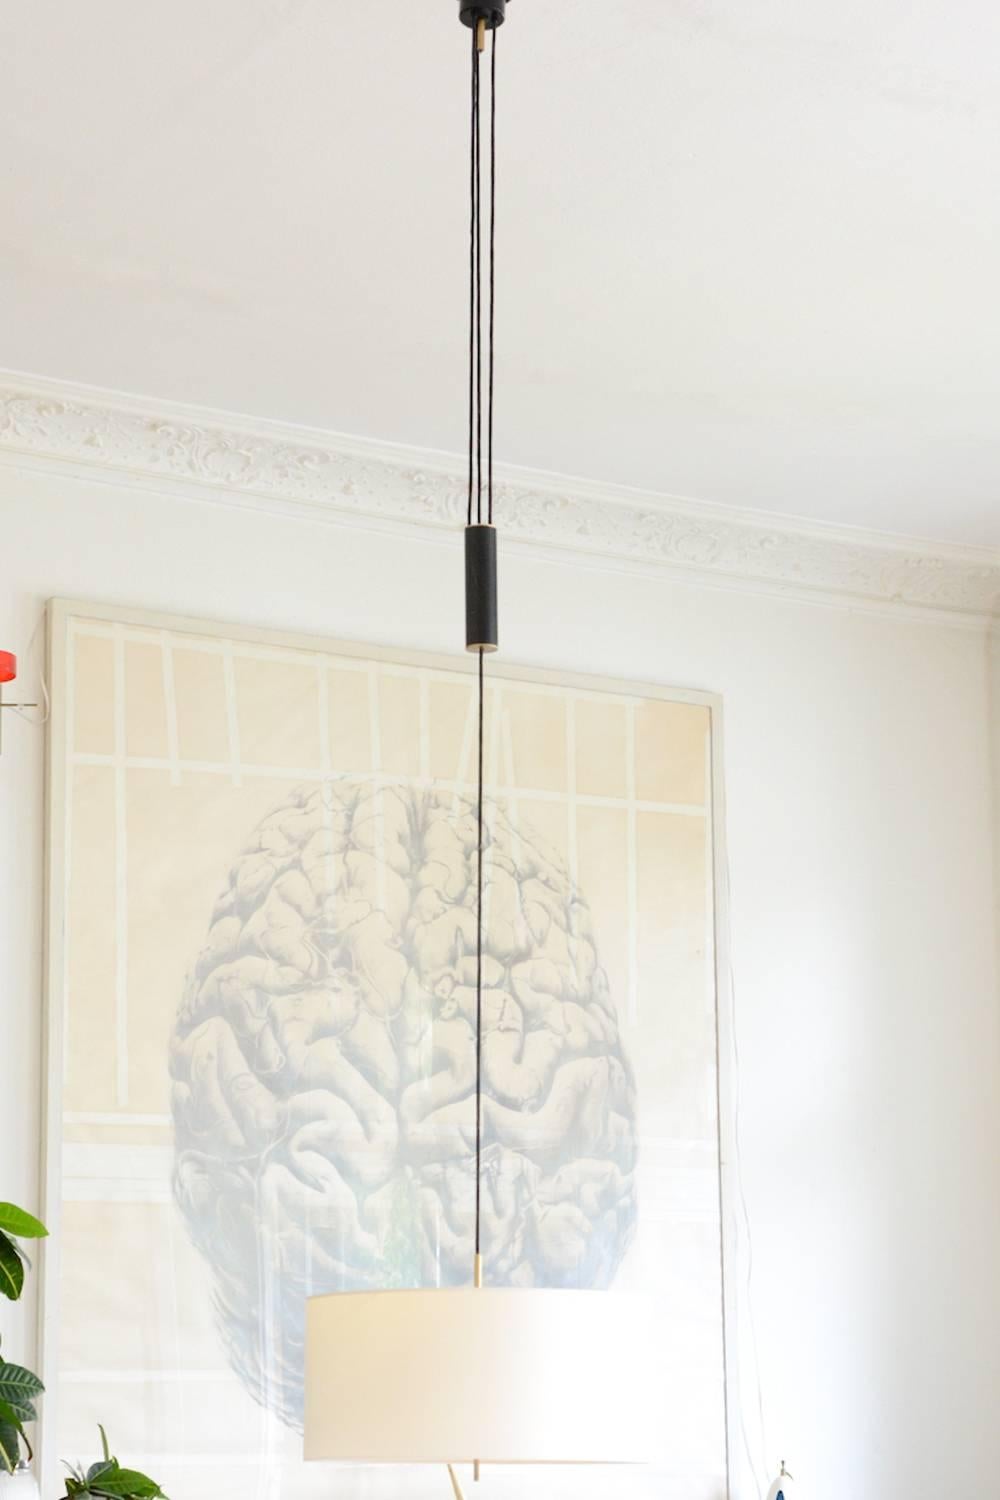 Very elegant Italian pulley pendant from 1950.
Made in extraordinary quality, has a perspey diffusor, which creates very soft lighting, a rotary switch at the bottom for three different lighting settings.
Measure: The pendant cab be extended to a